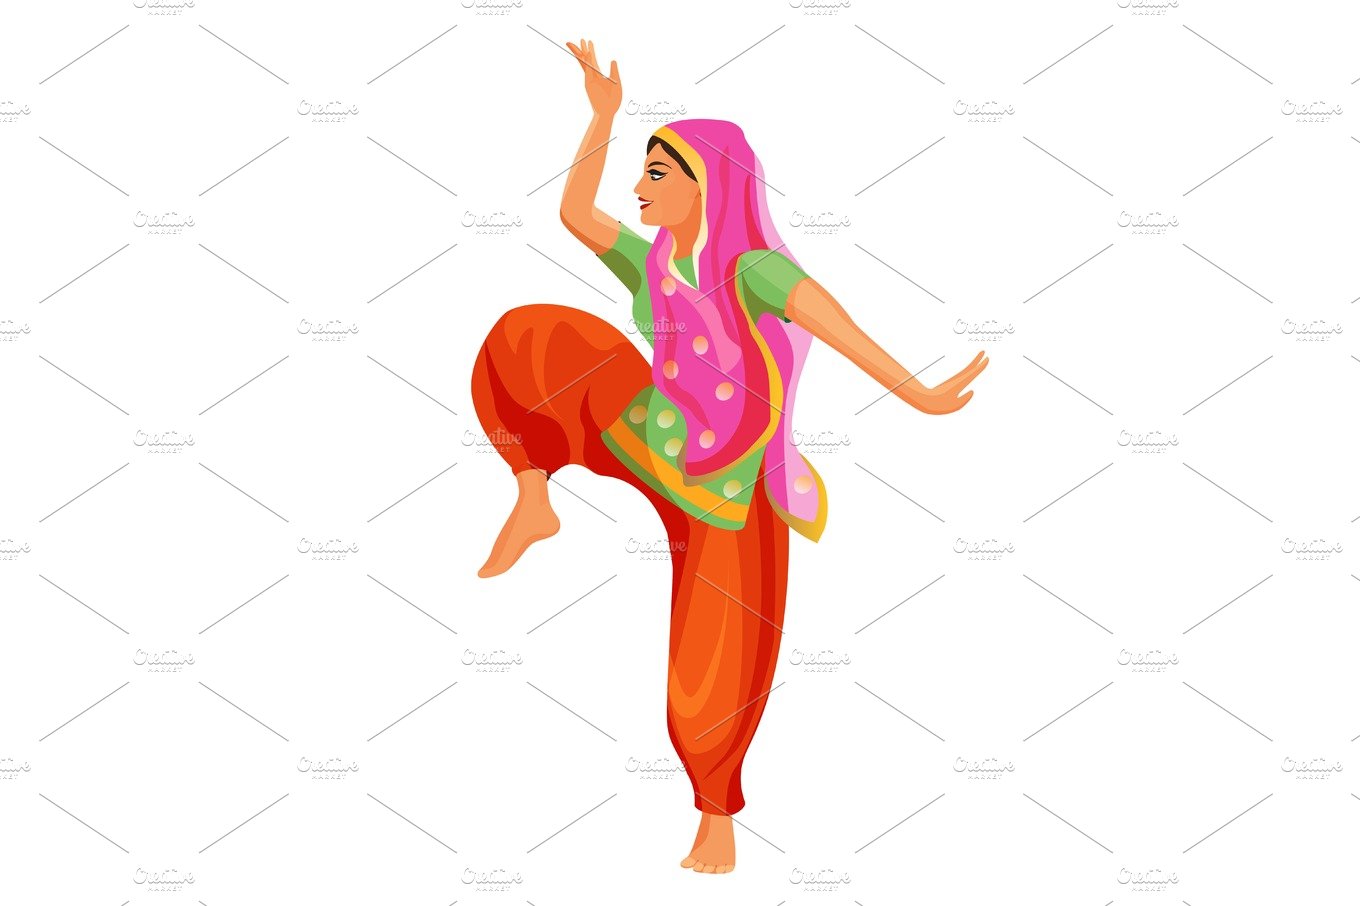 Solo dance performed by girl in silk shirt and trousers with covered head cover image.